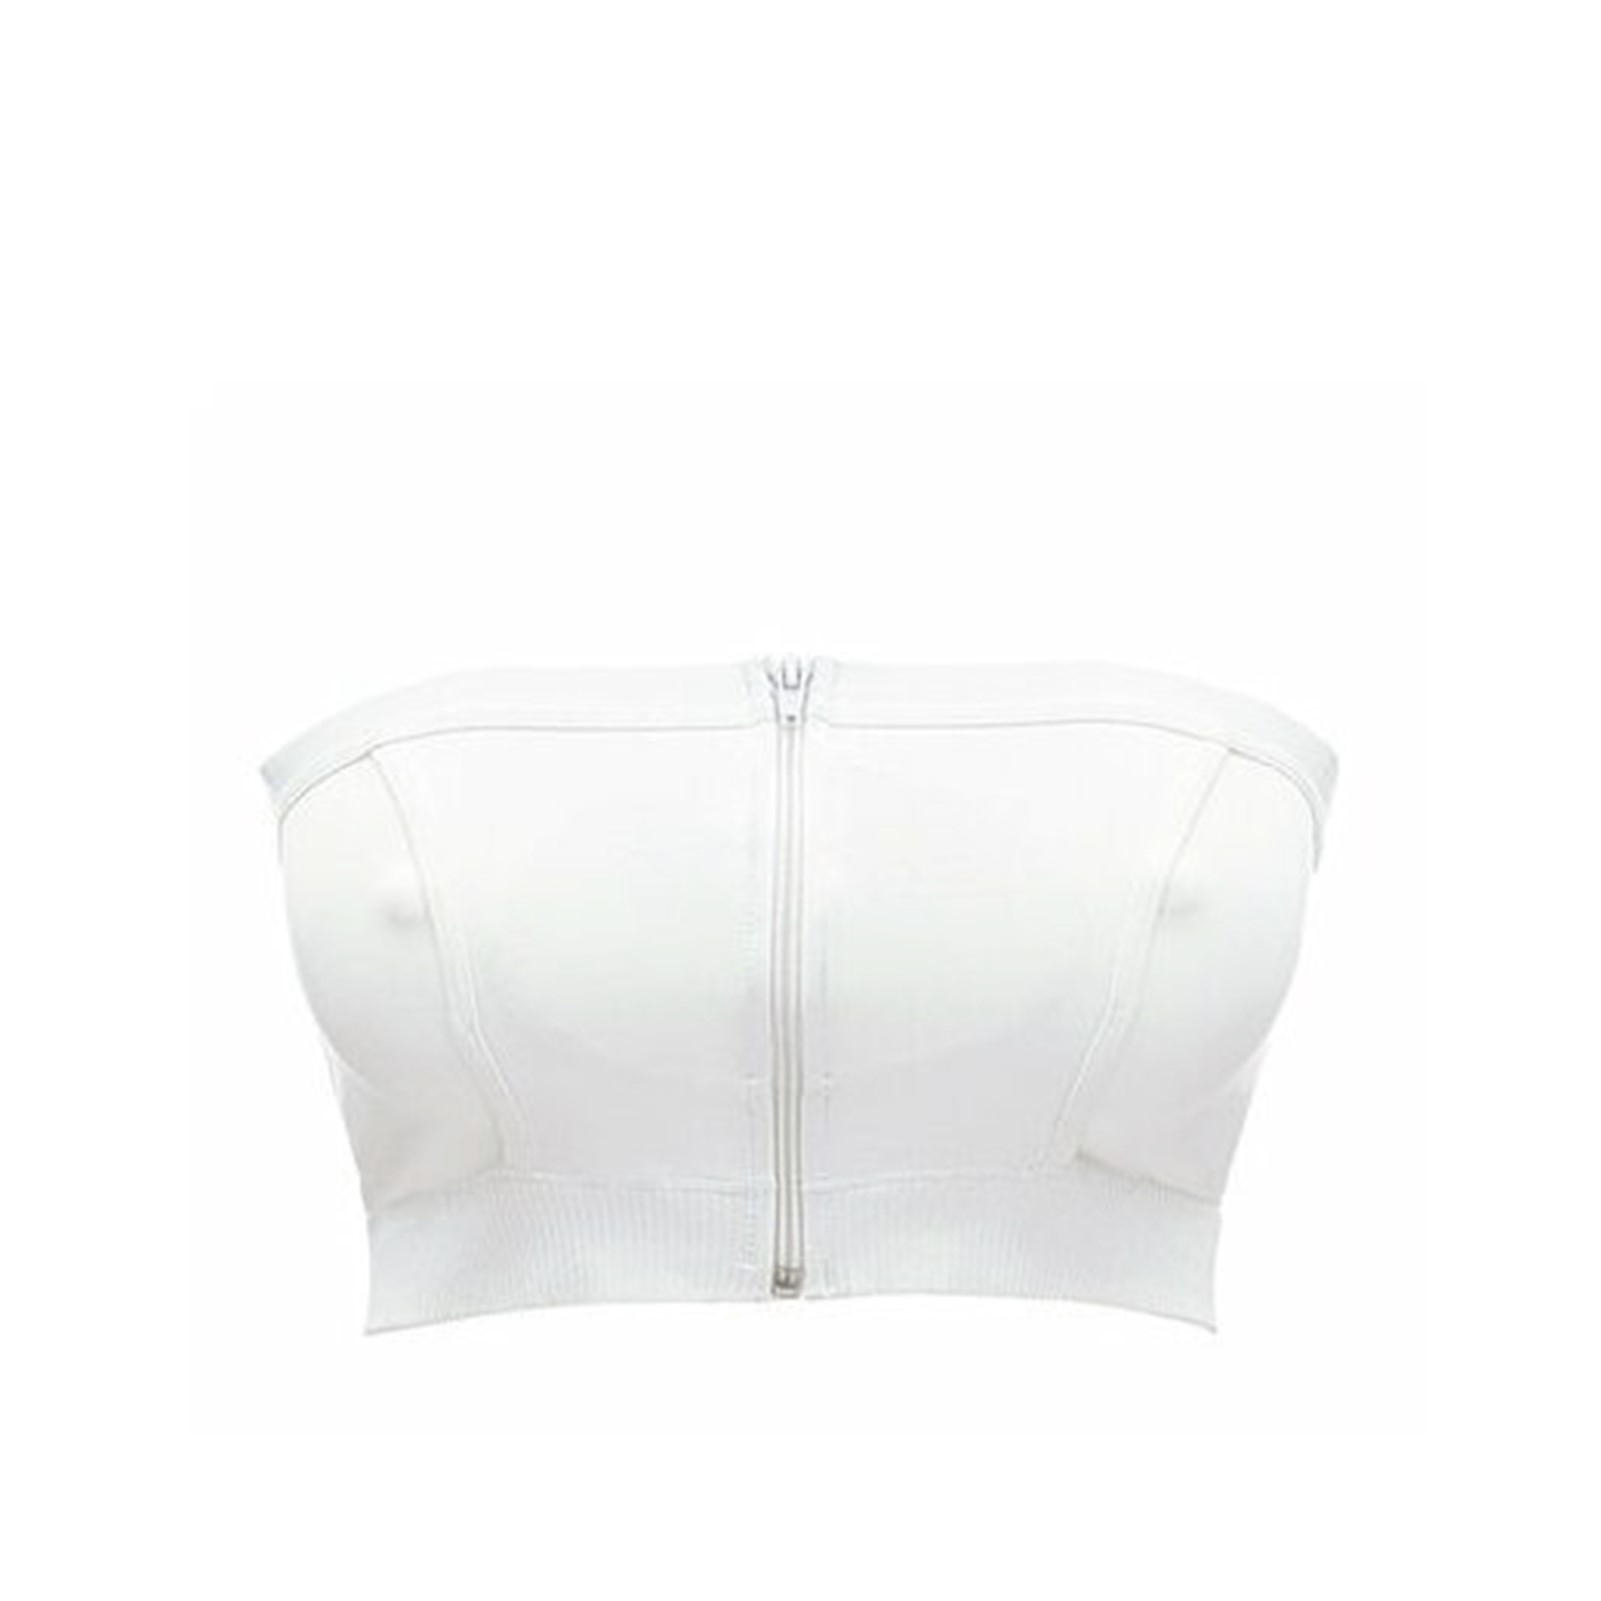 Medela Hands-Free Pumping Bustier White S, 43% OFF